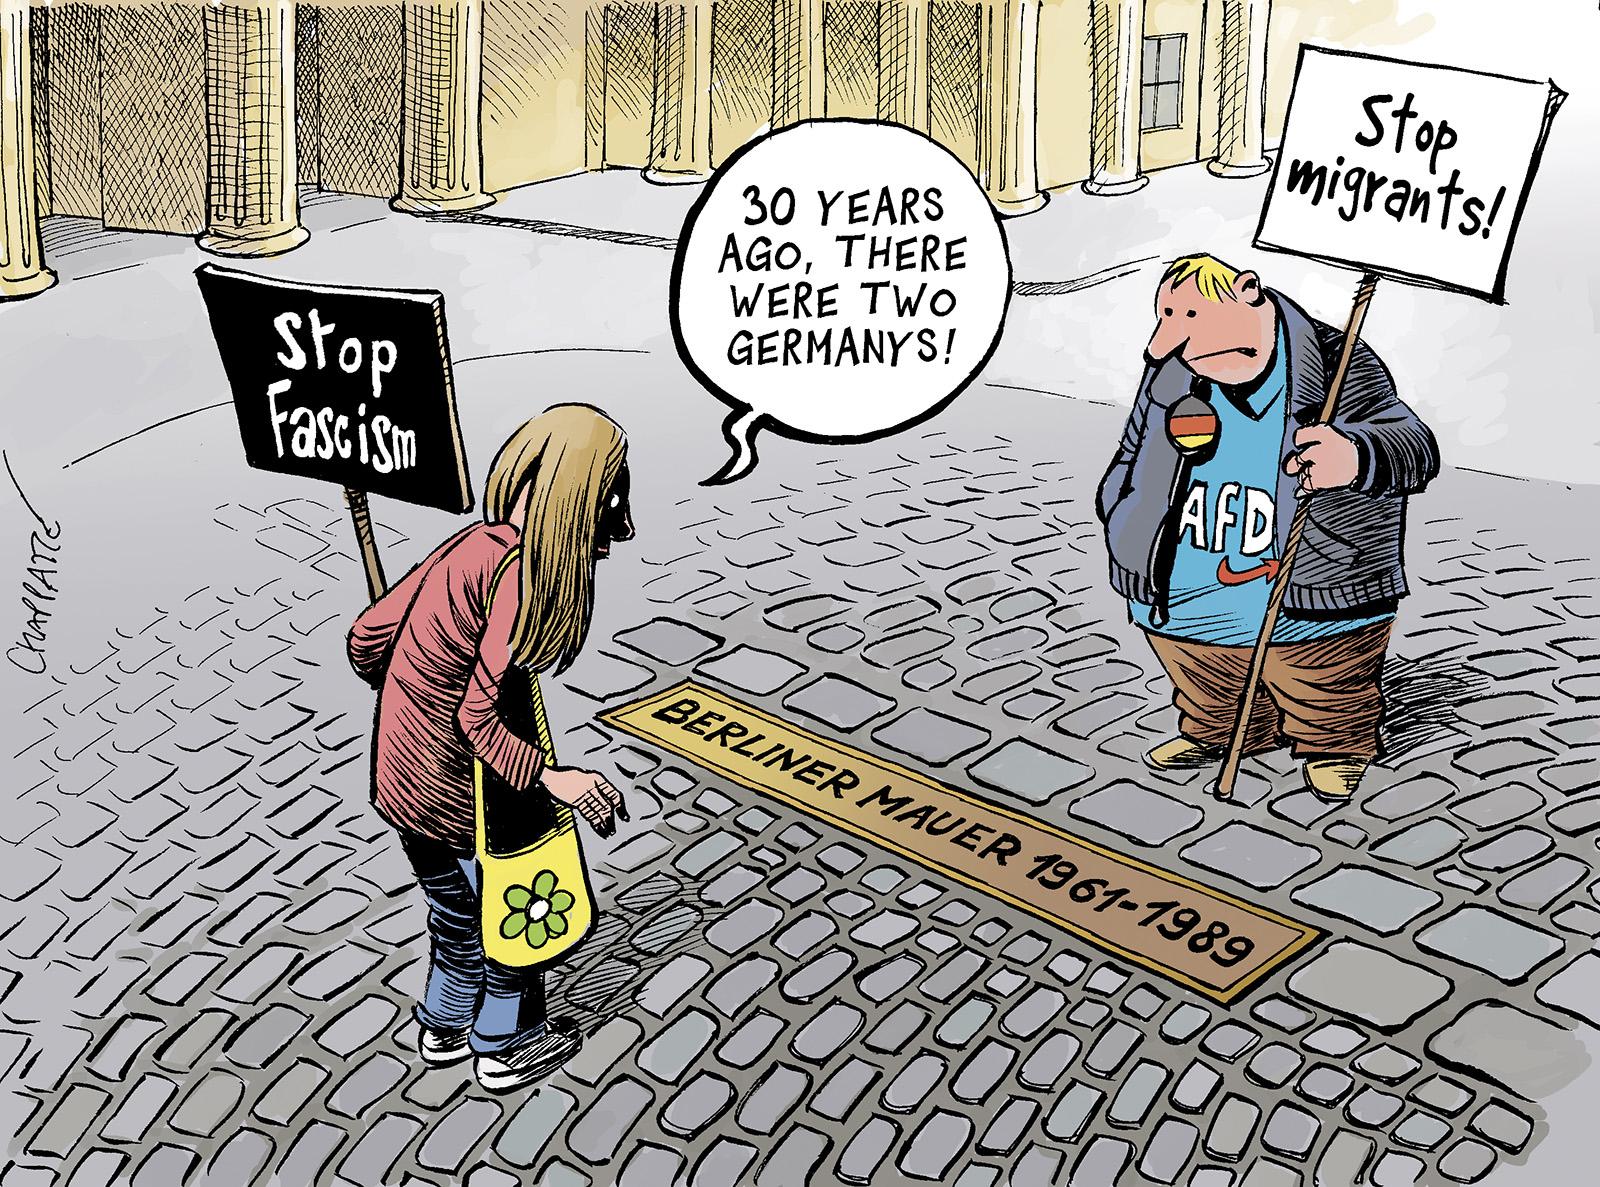 Germany, 30 years after...